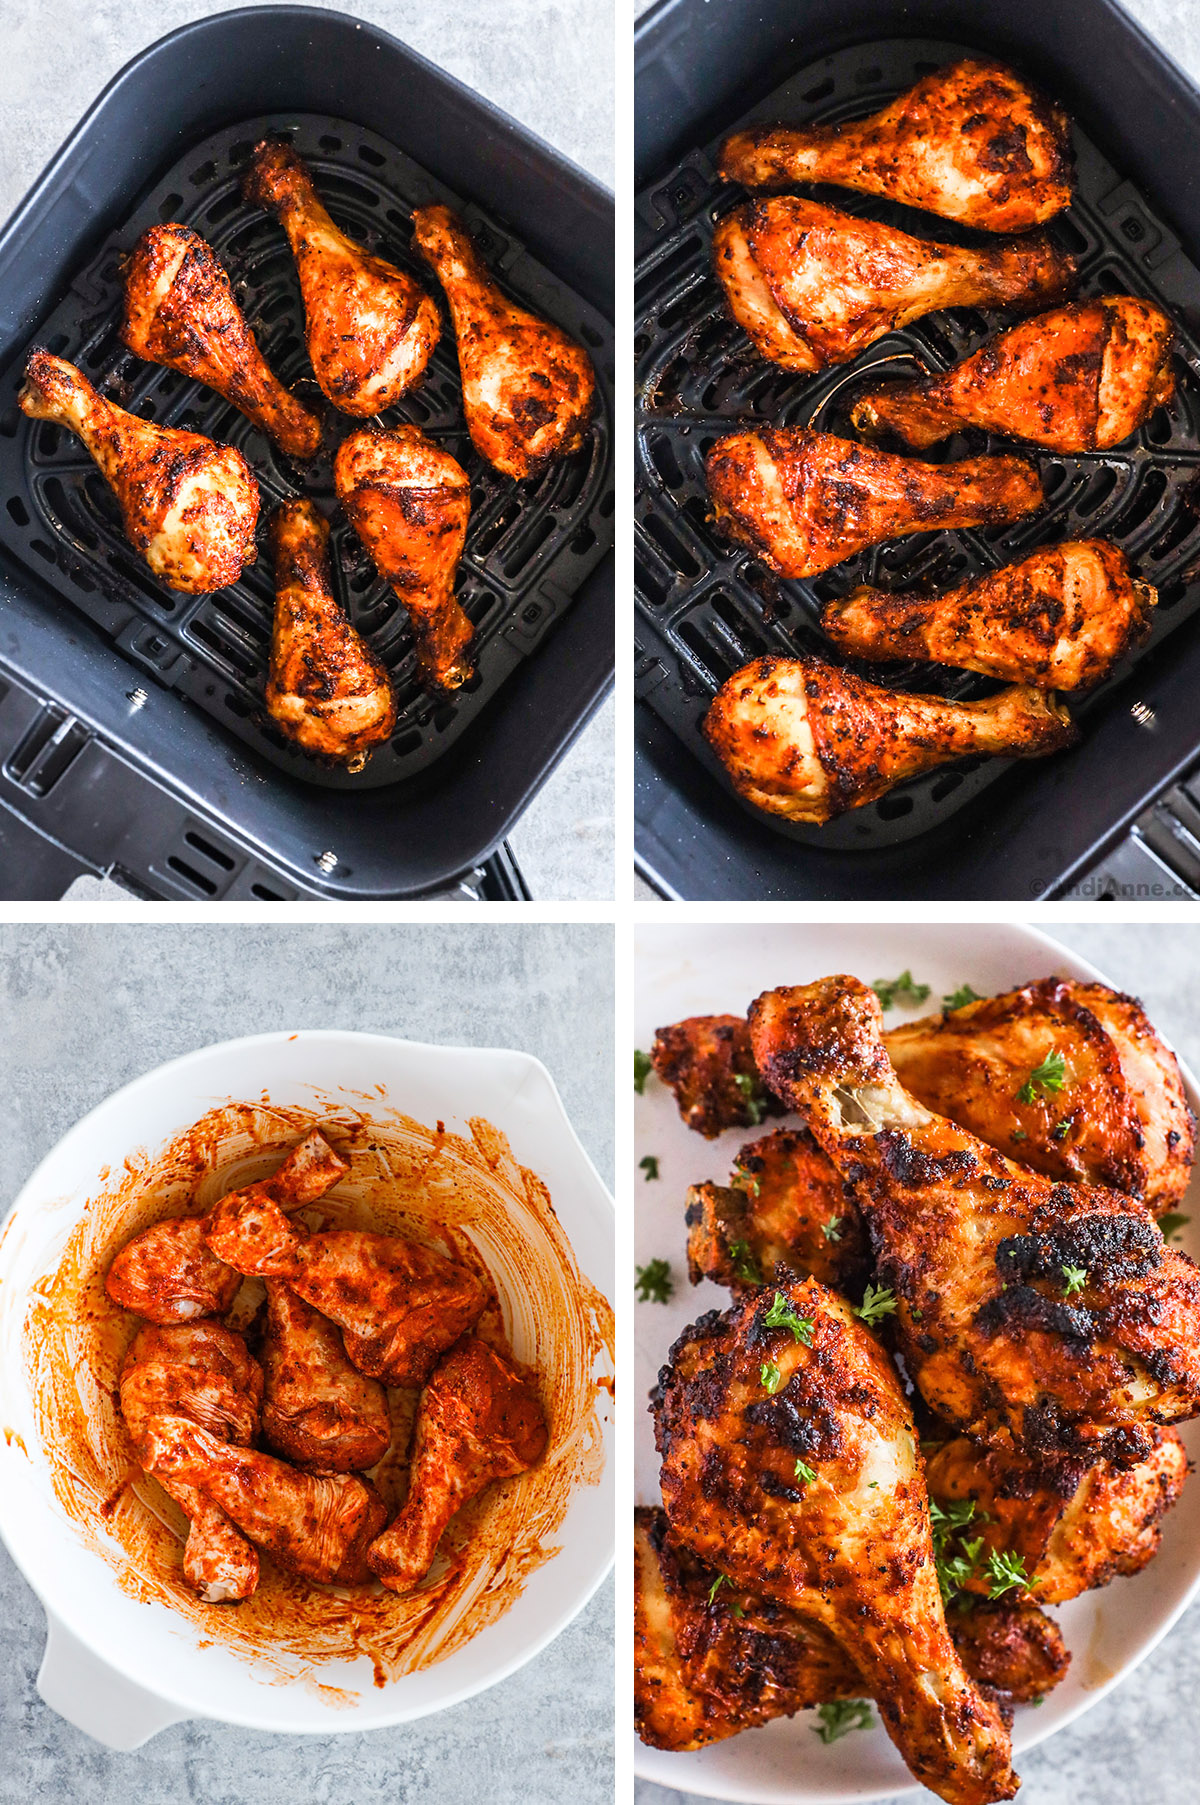 Four images of cooked air fryer chicken legs. First two are in an air fryer basket. Thir is raw chicken legs in a bowl tossed with red sauce. Fourth is crispy cooked chicken legs stacked on a plate.